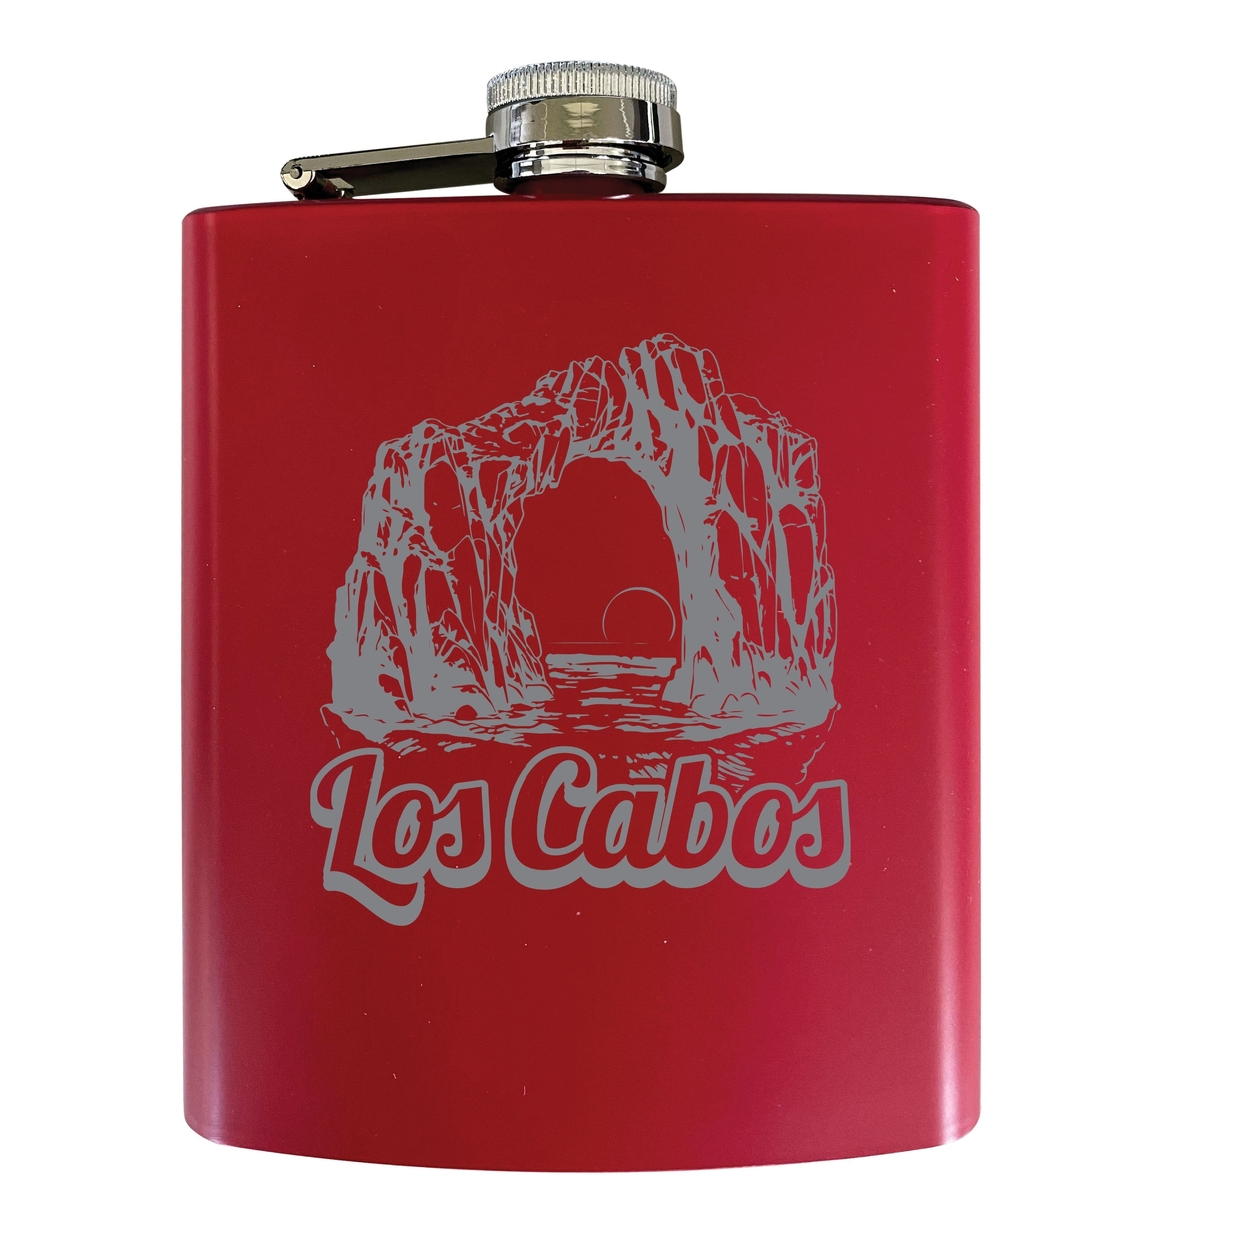 Los Cabos Mexico Souvenir 7 Oz Engraved Steel Flask Matte Finish - Red,,4-Pack